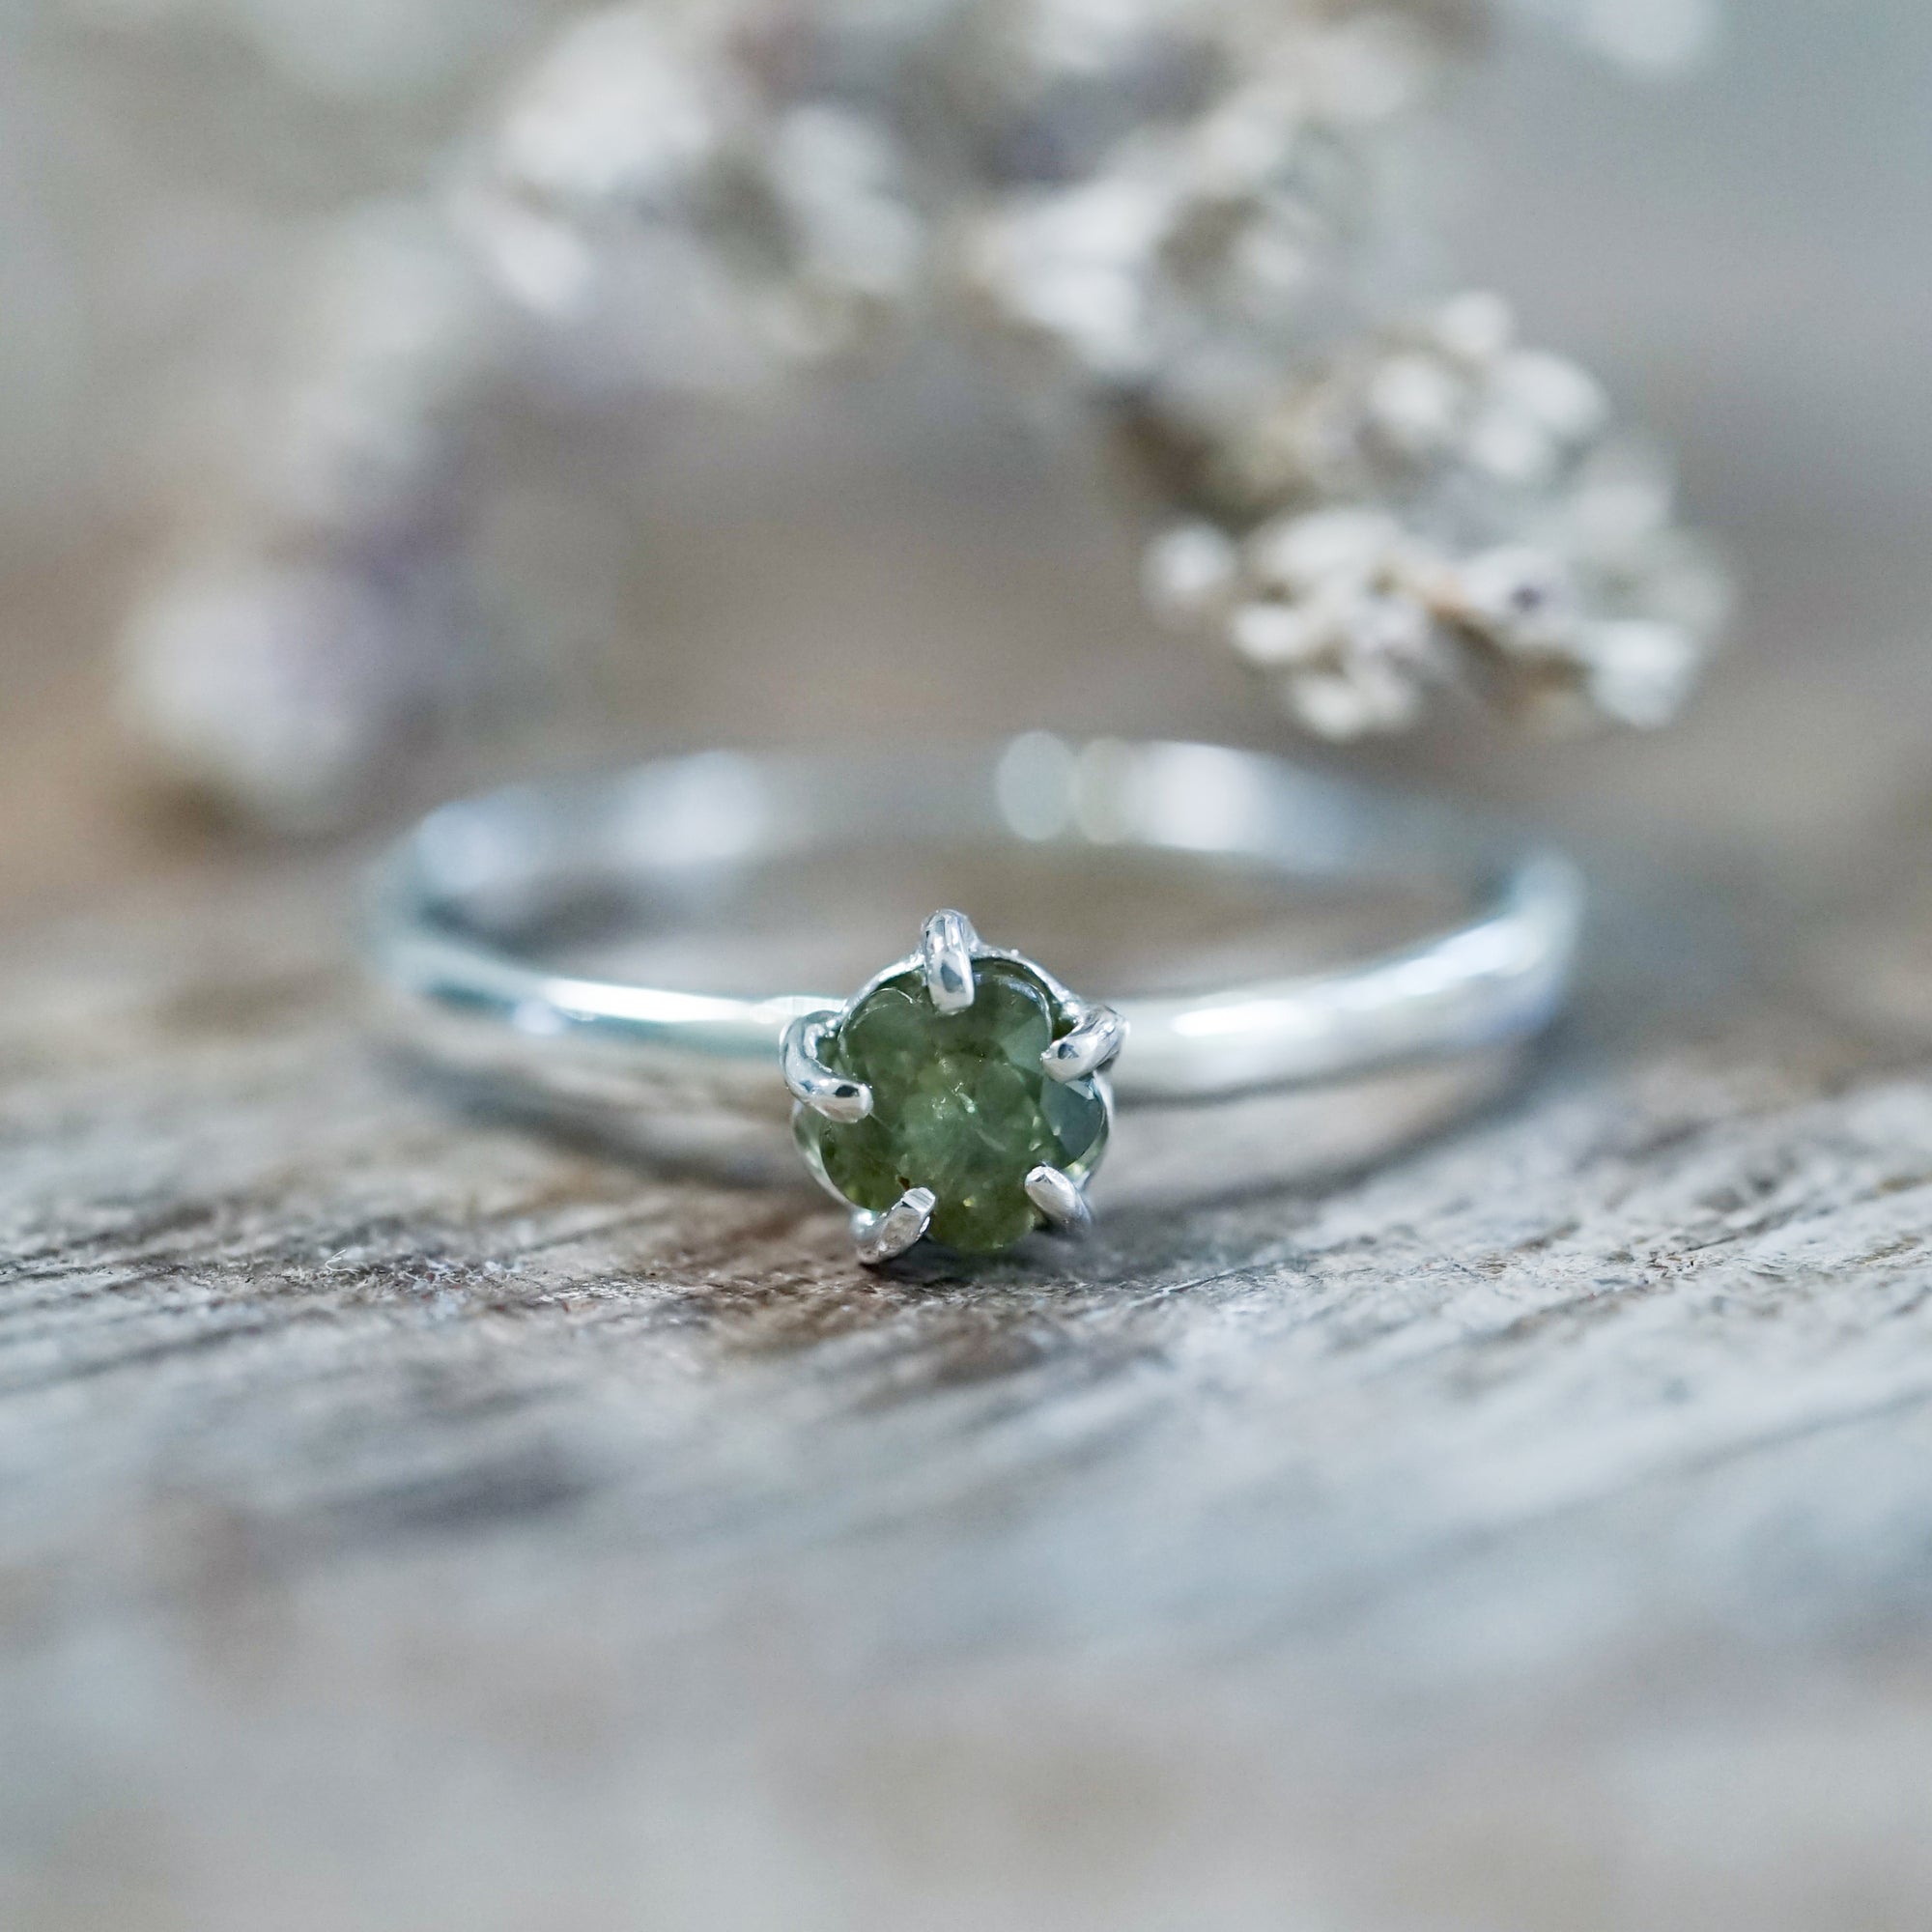 Sapphire Flower Ring - Gardens of the Sun | Ethical Jewelry